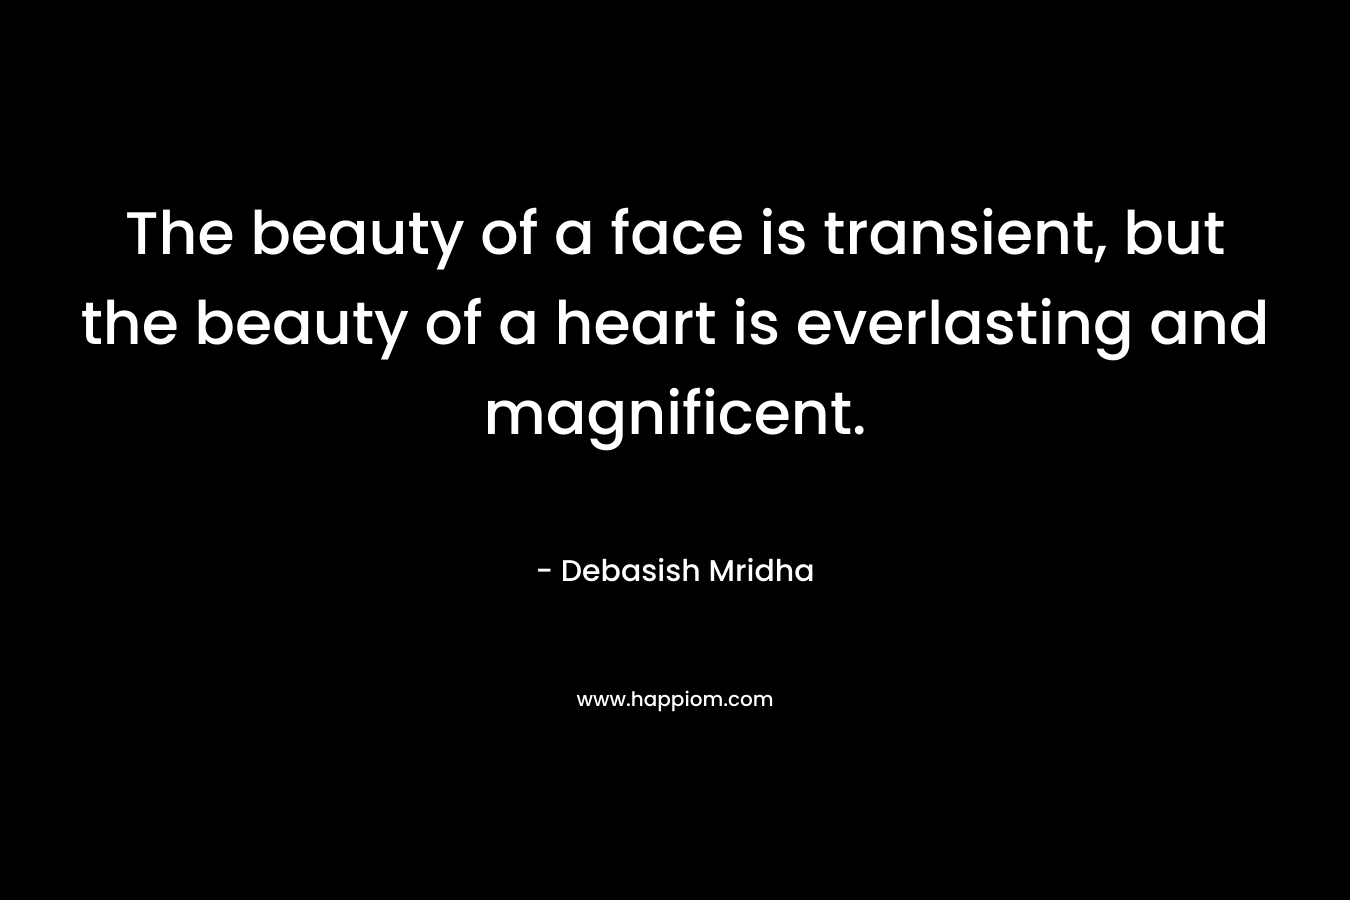 The beauty of a face is transient, but the beauty of a heart is everlasting and magnificent. – Debasish Mridha